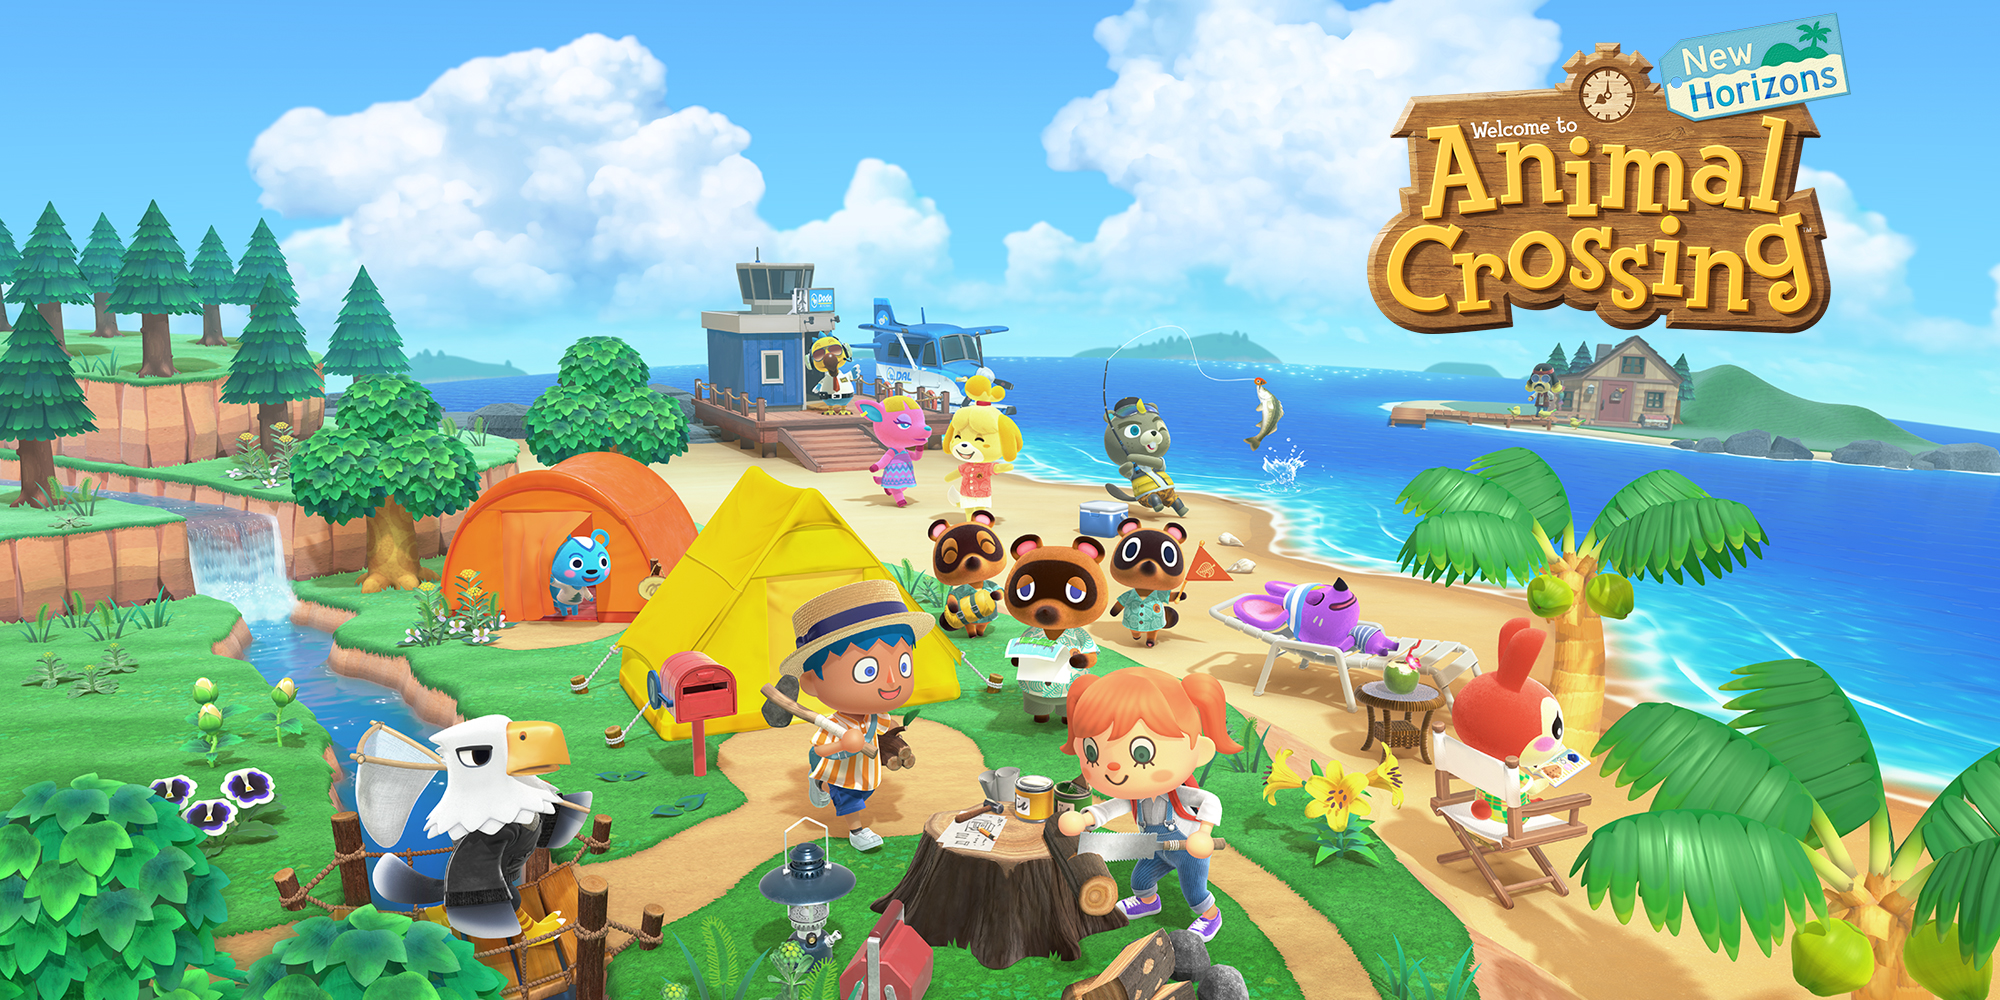 See what the island life has in store for you in Animal Crossing: New Horizons!